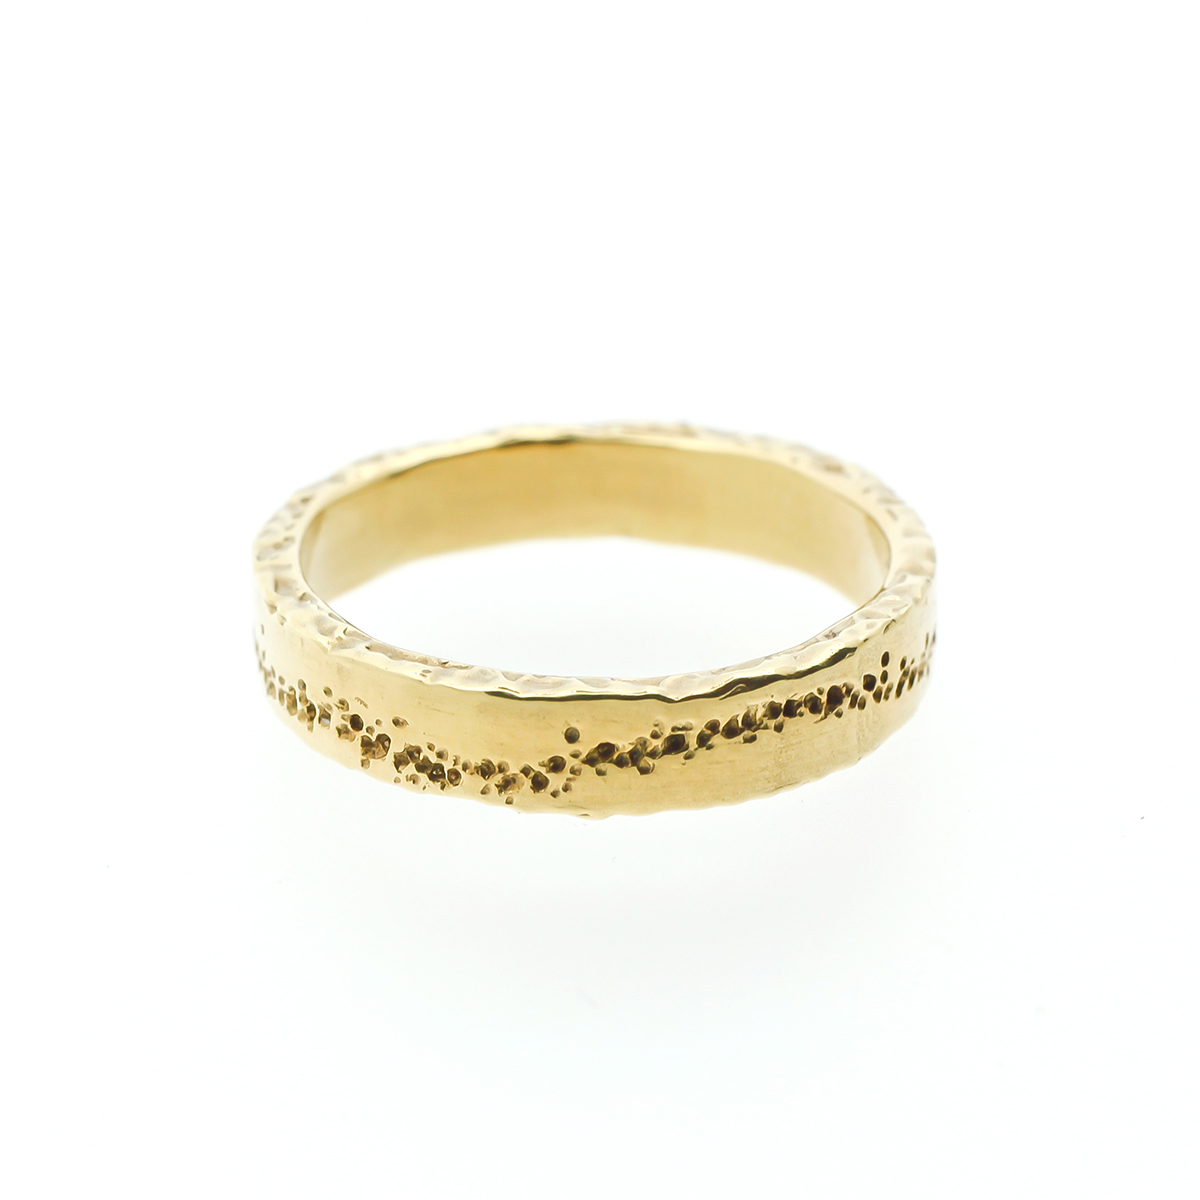 Golden wedding ring with original line in the band